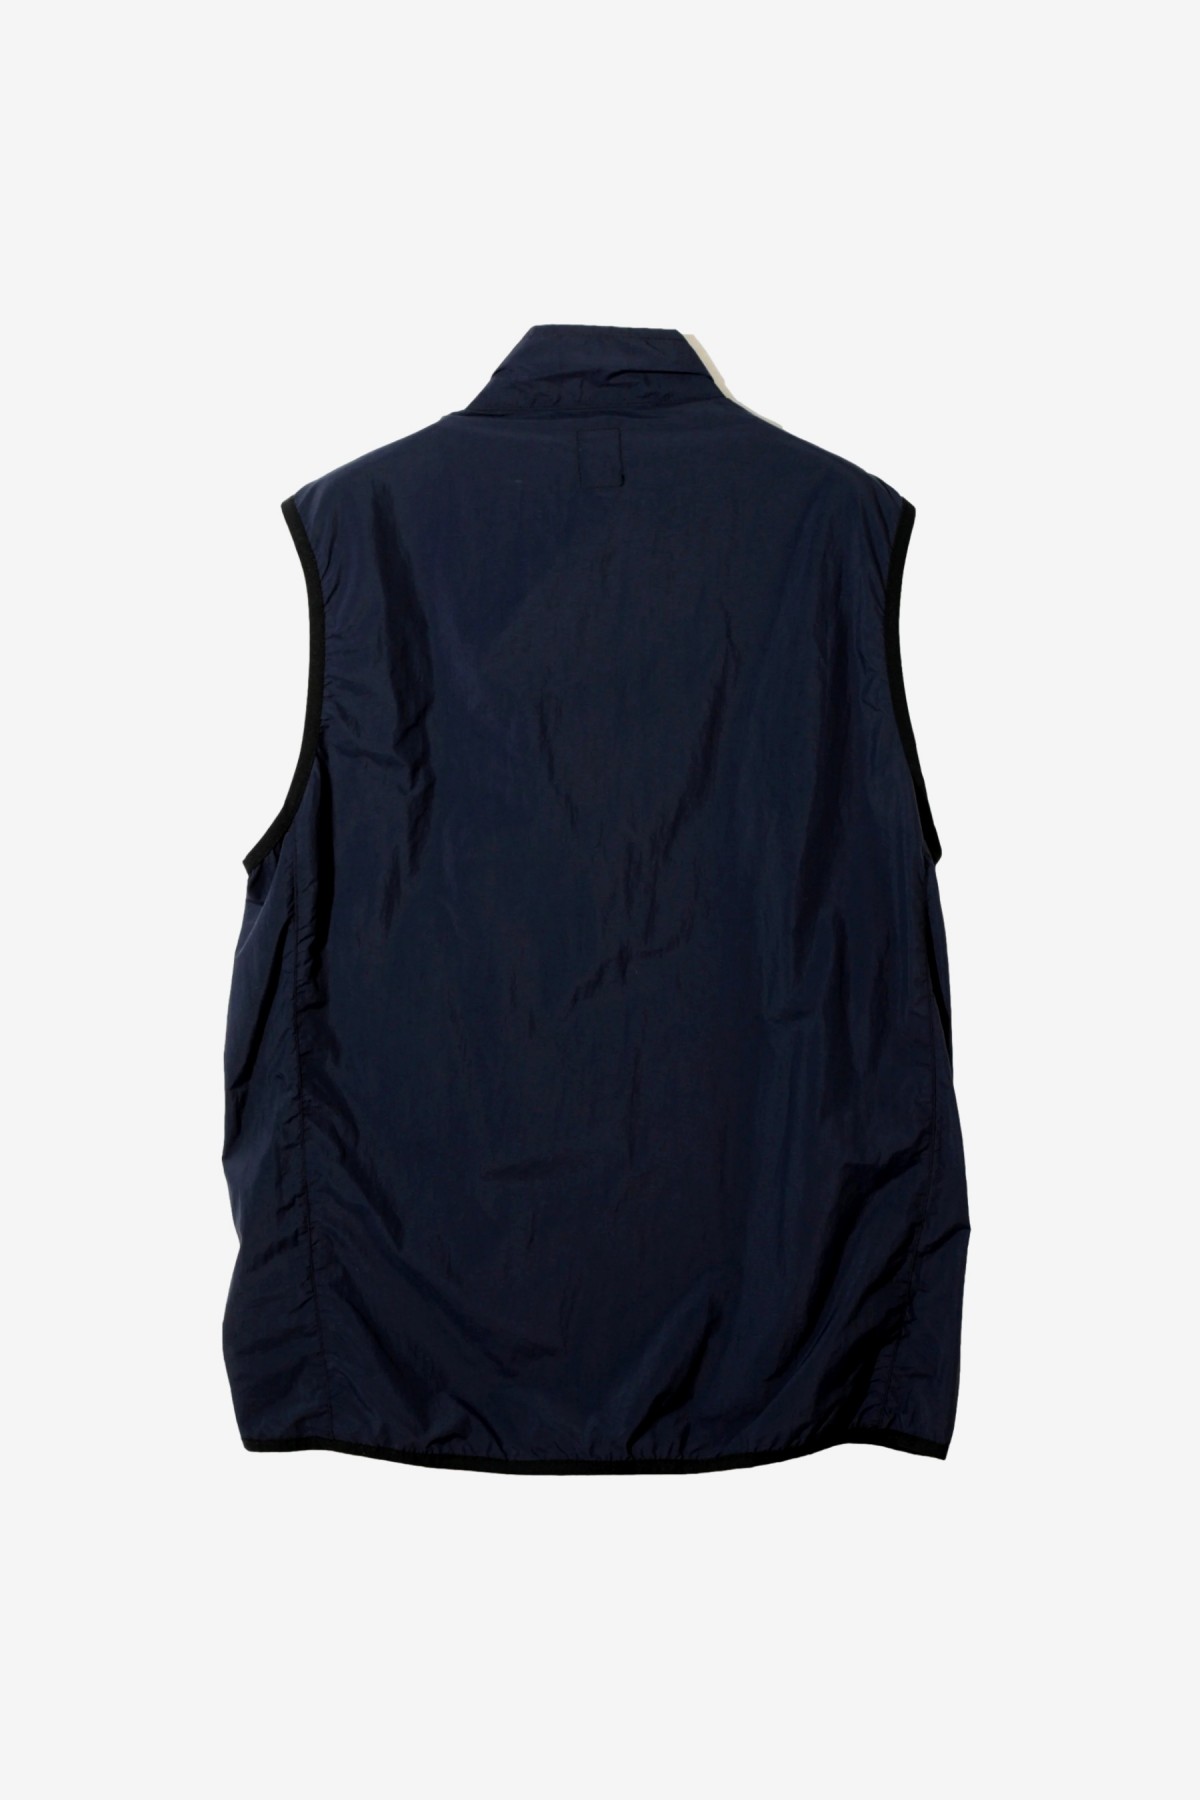 - West8 Vest | Navy Store Packable in South2 Afura